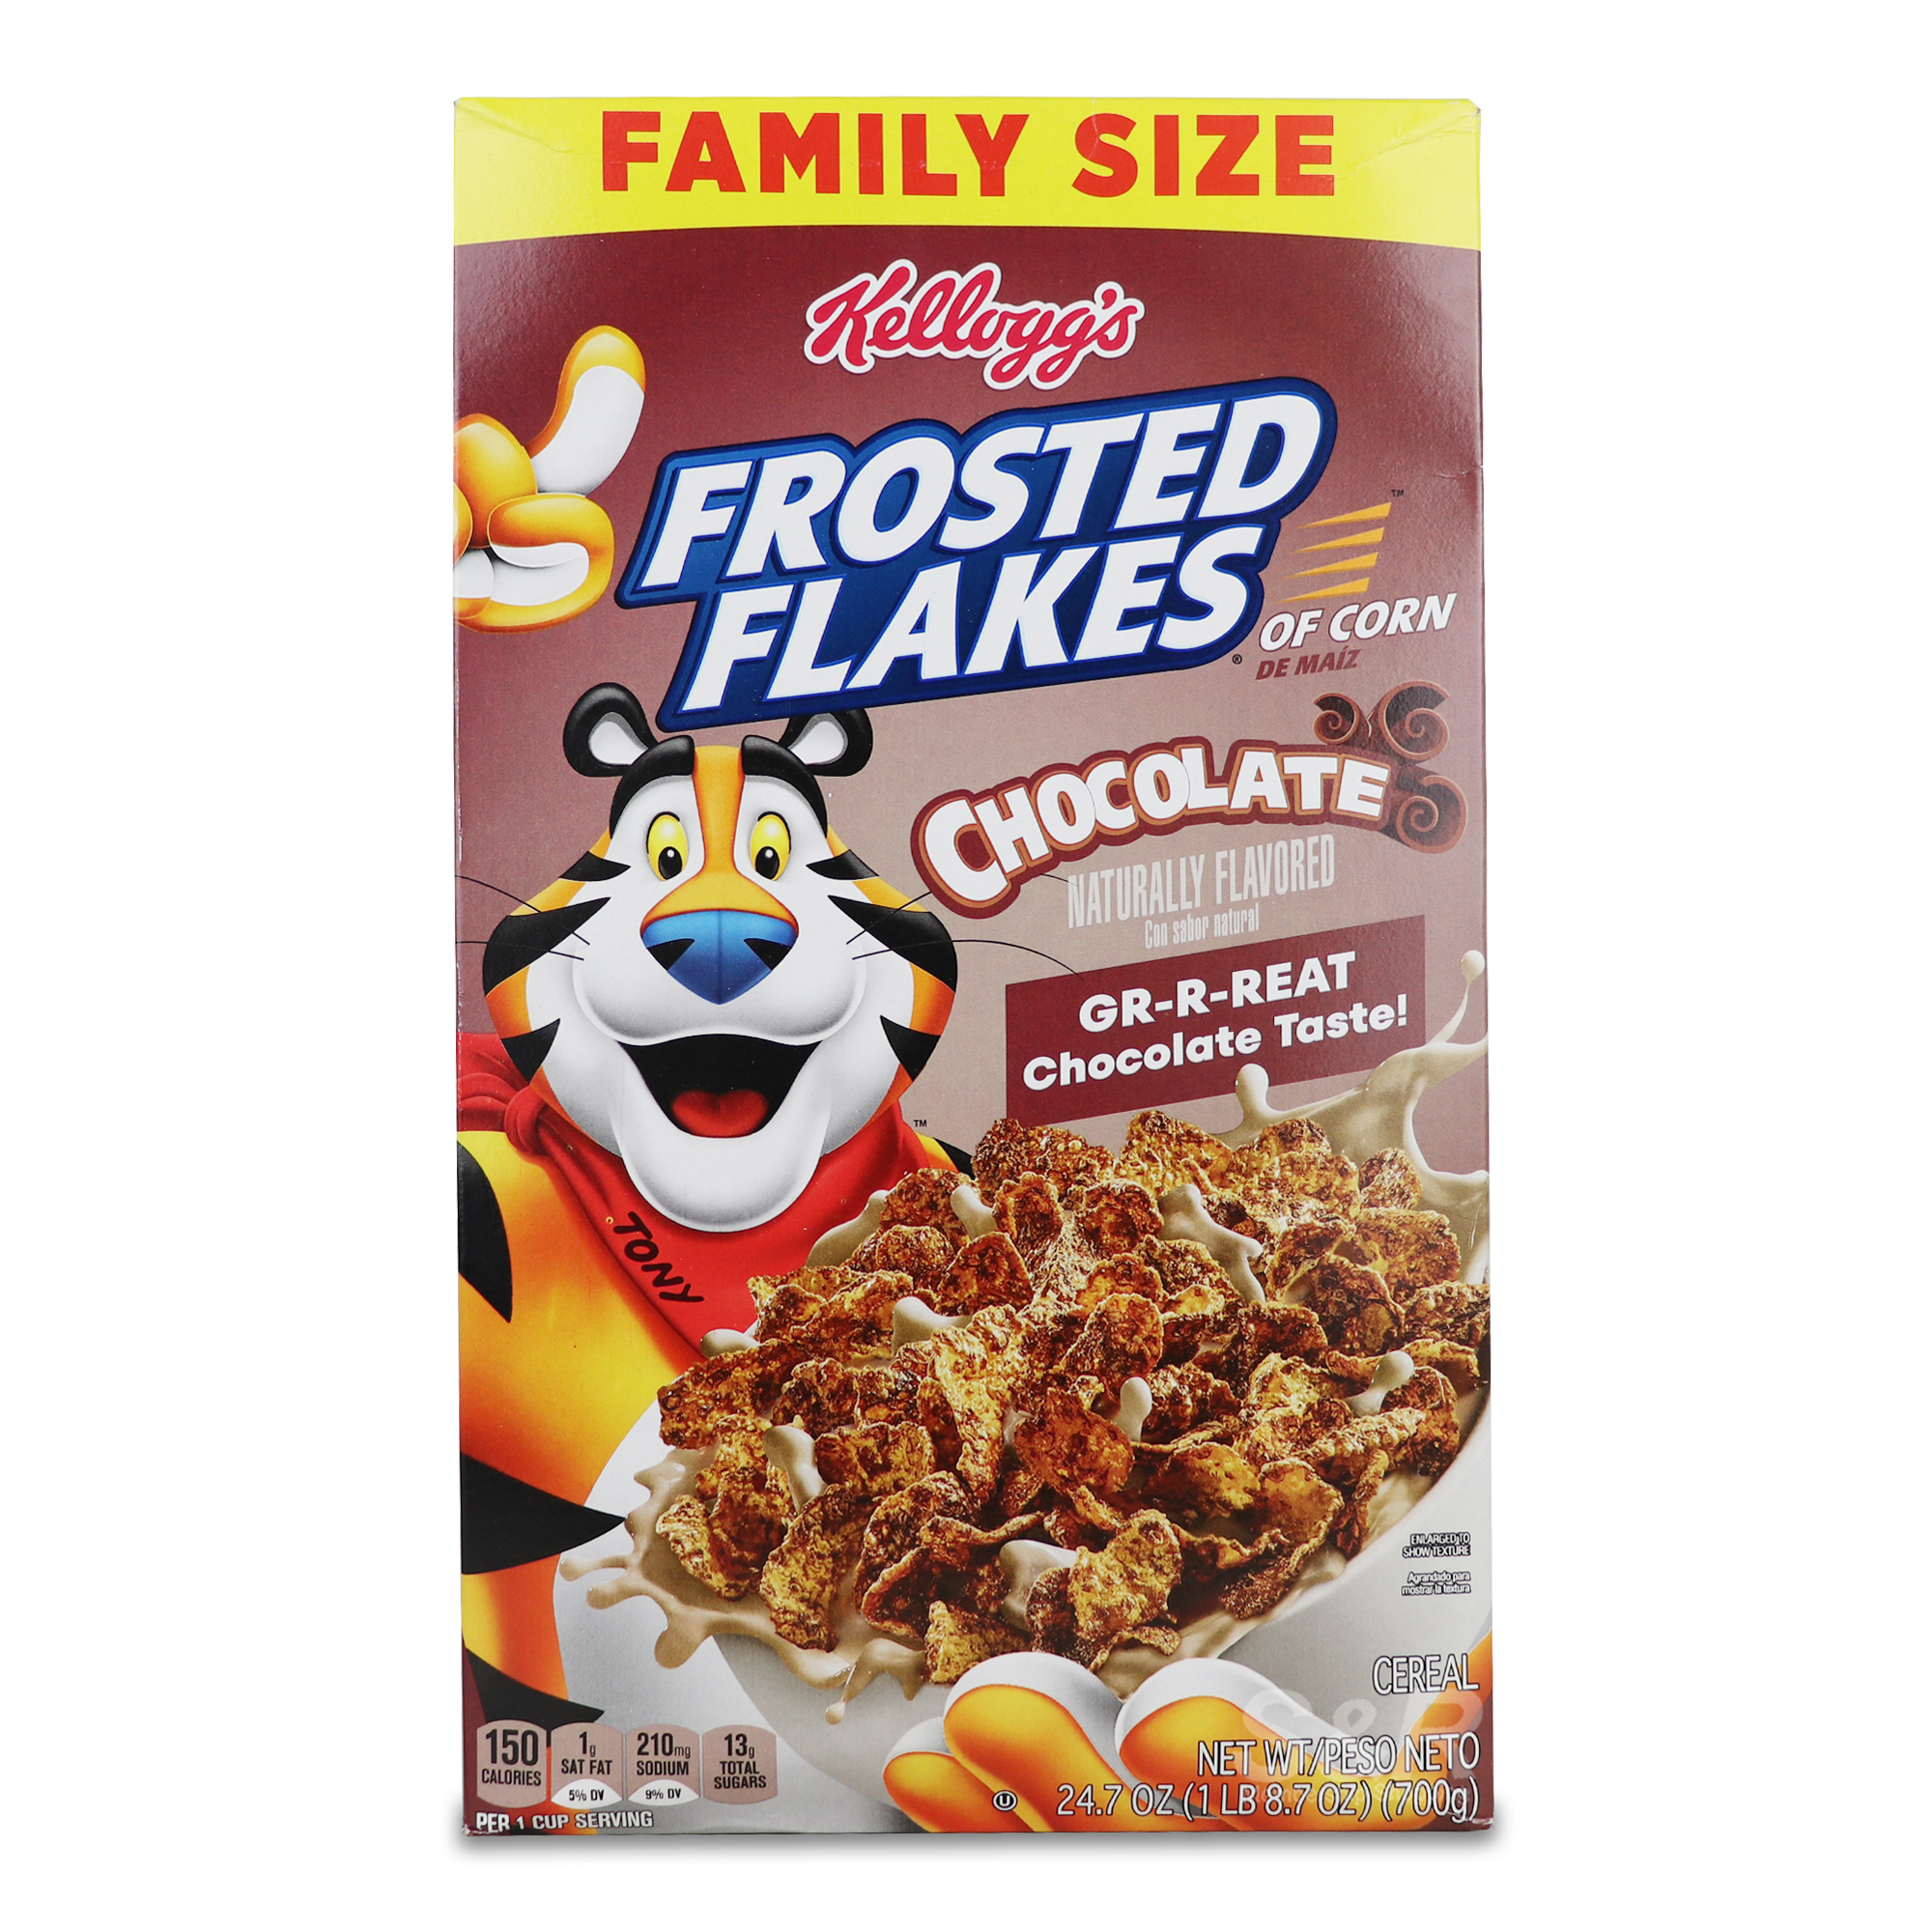 Kellogg's Frosted Flakes Chocolate Family Size 700g